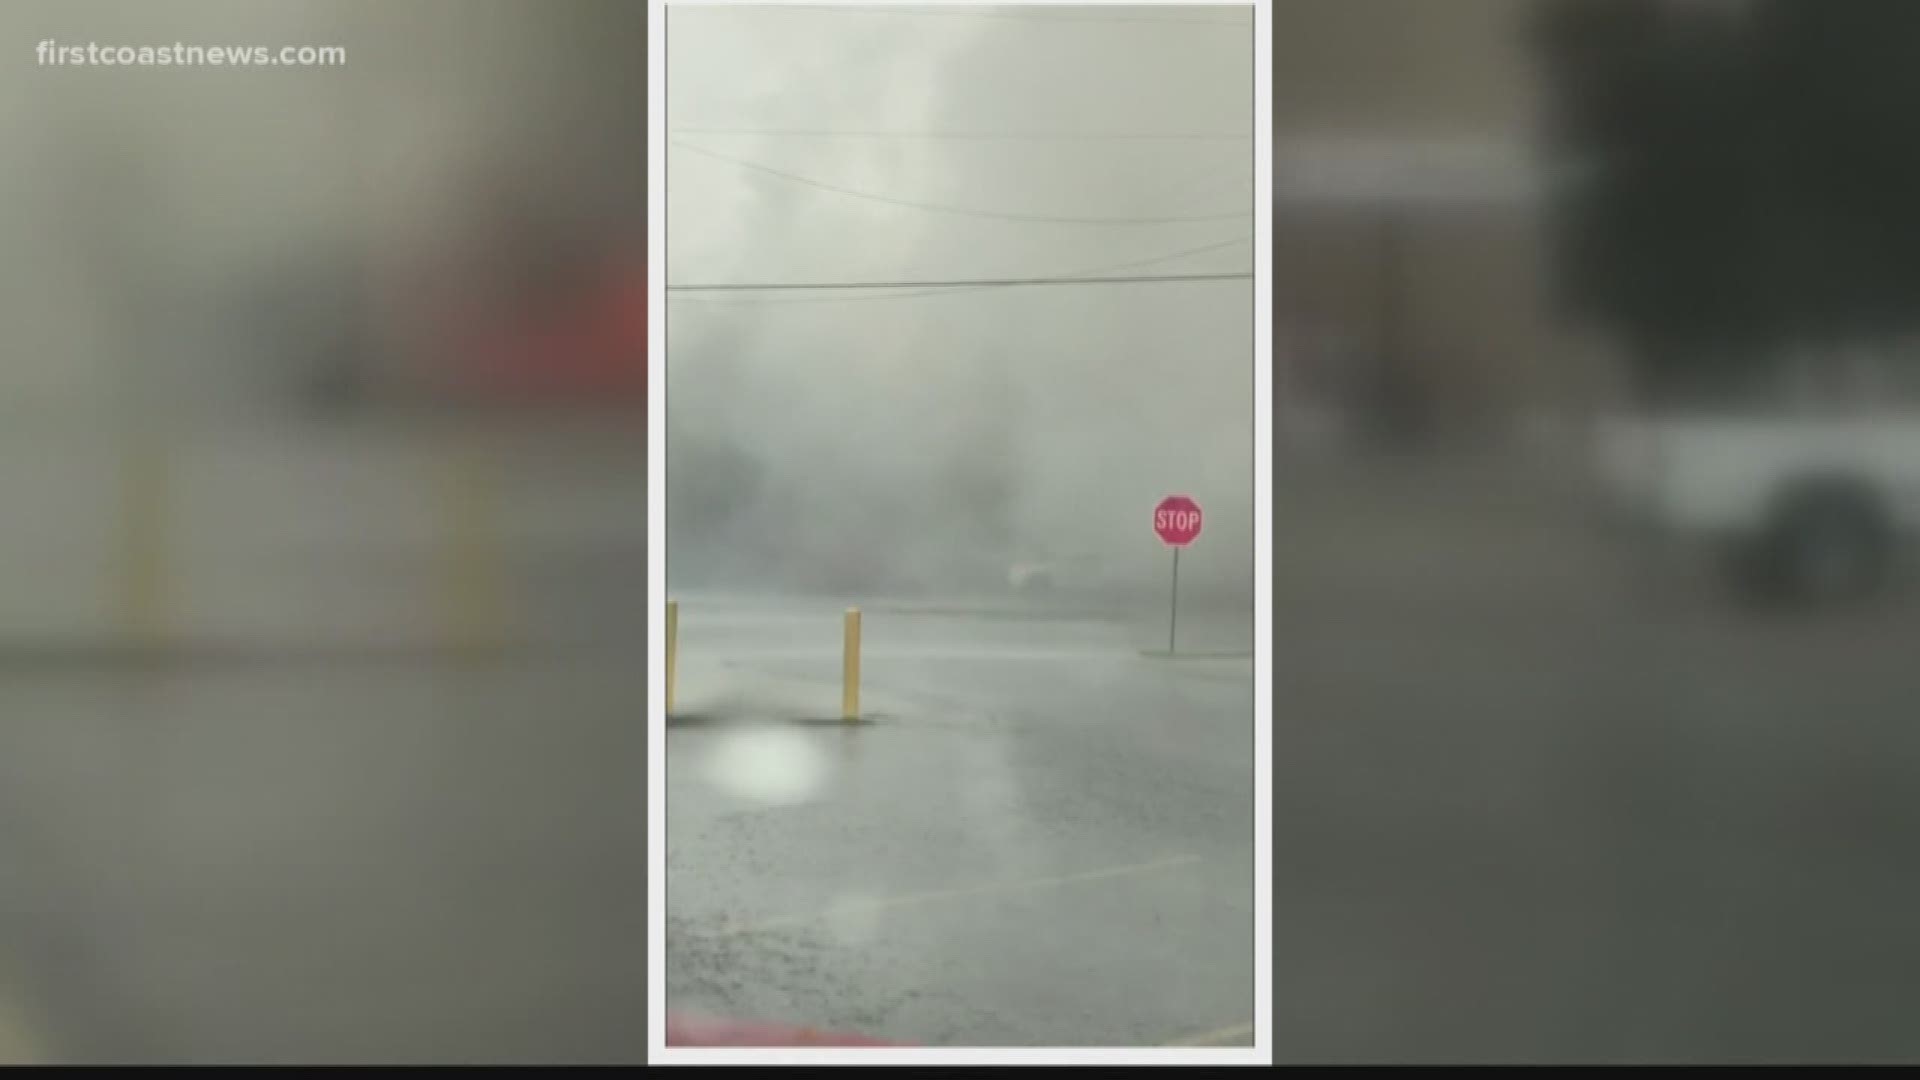 Viewers sent in photos and videos showing the Badcock Furniture store with visible flames and smoke coming from the roof area.